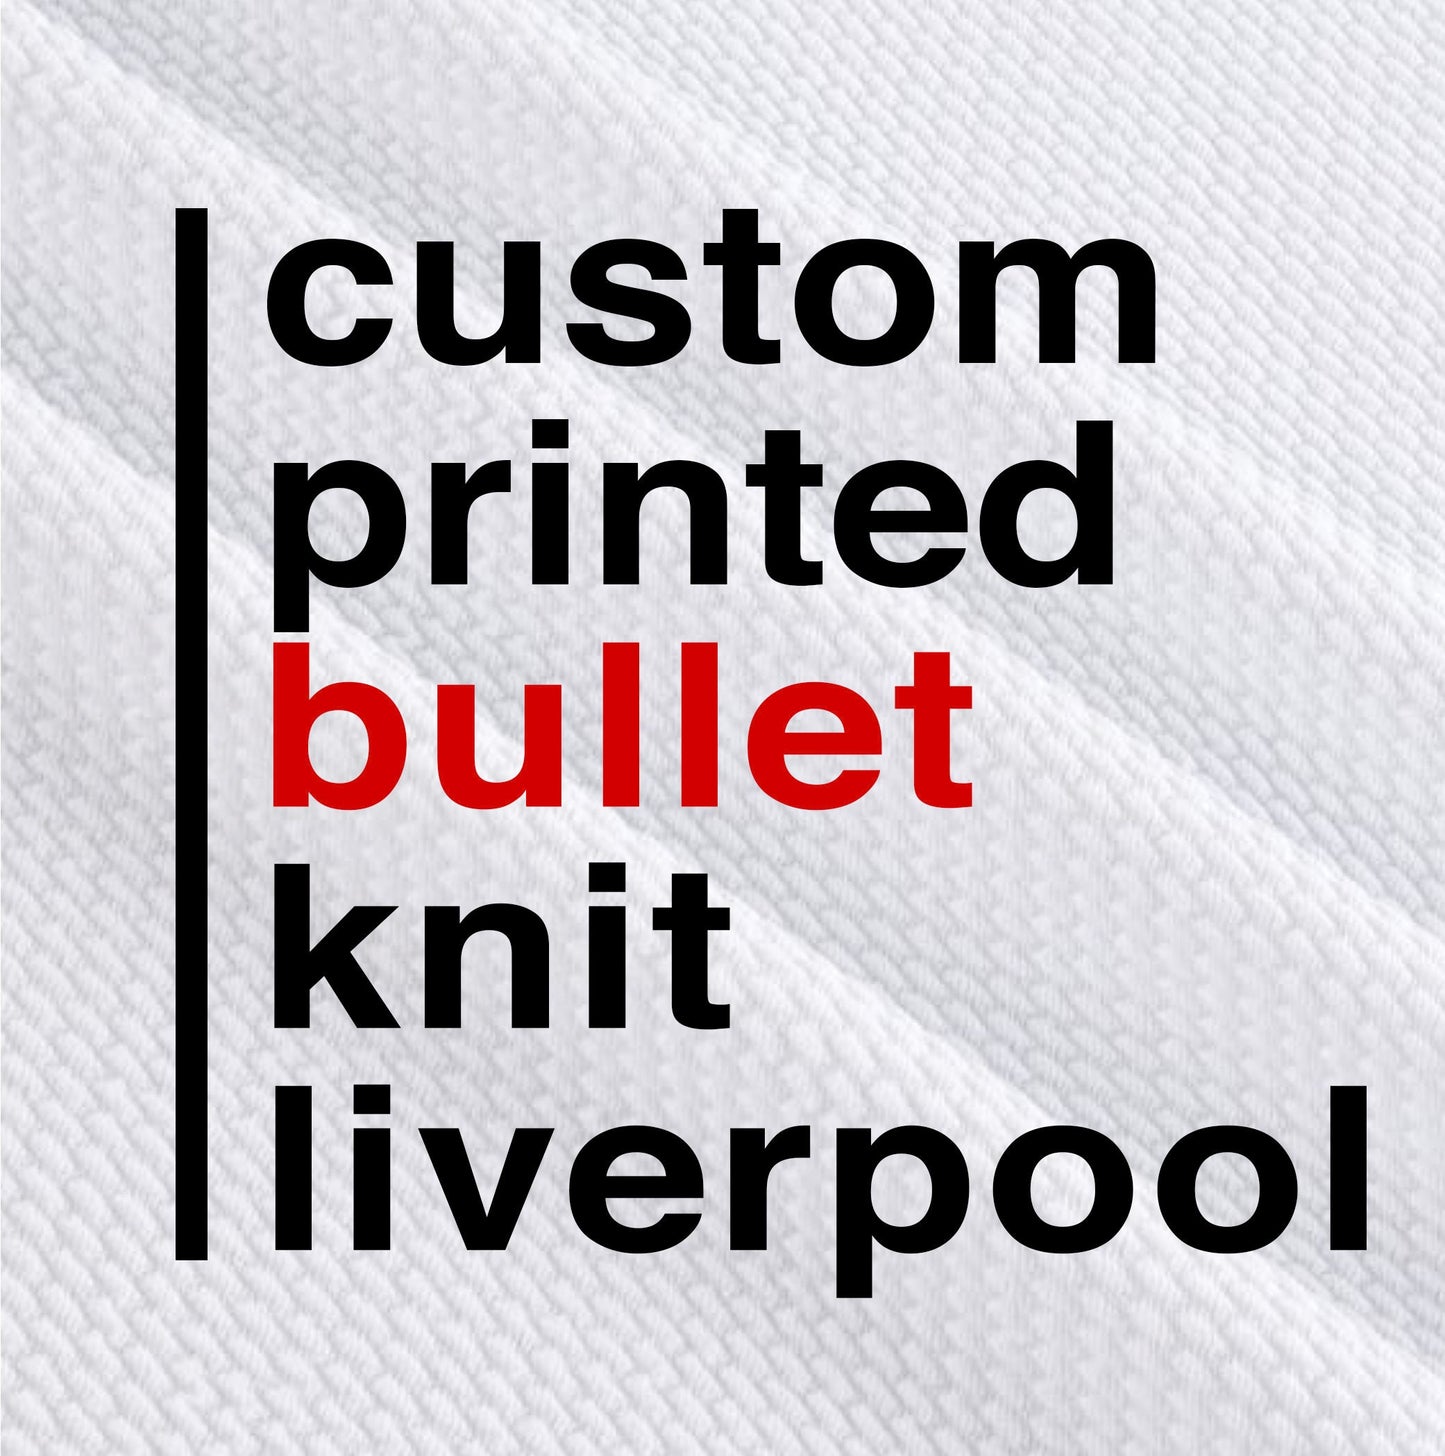 Custom Printed Liverpool Knit Fabric, Personalized Images on Liverpool Knit for Bows and Bummies